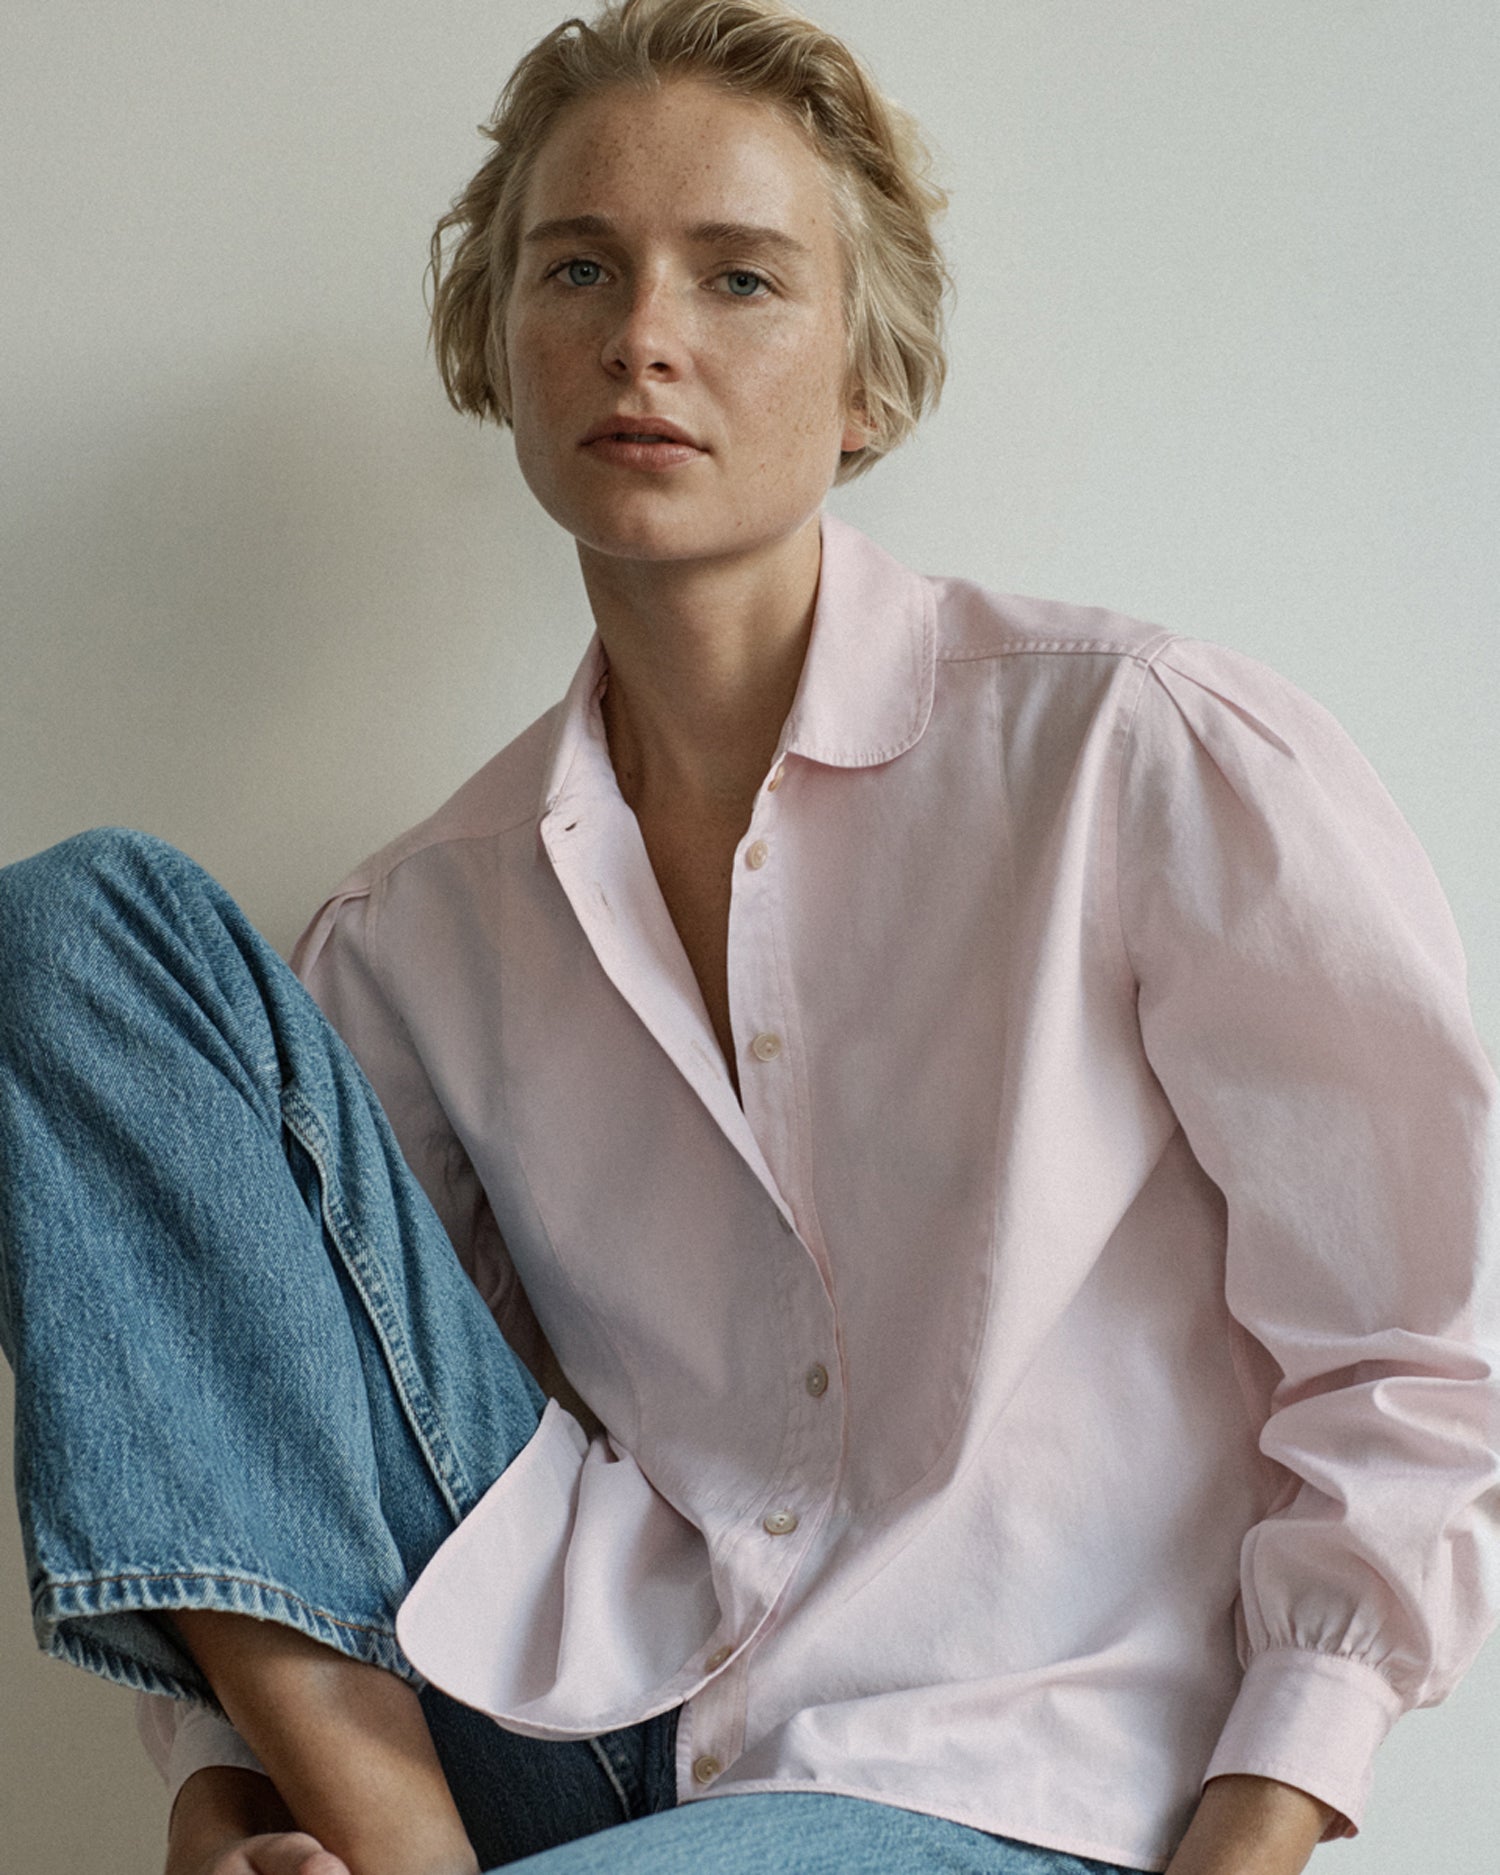 Woman sitting with one foot propped up wearing a long sleeve button-down blouse and jeans. Blouse is light pink cotton.